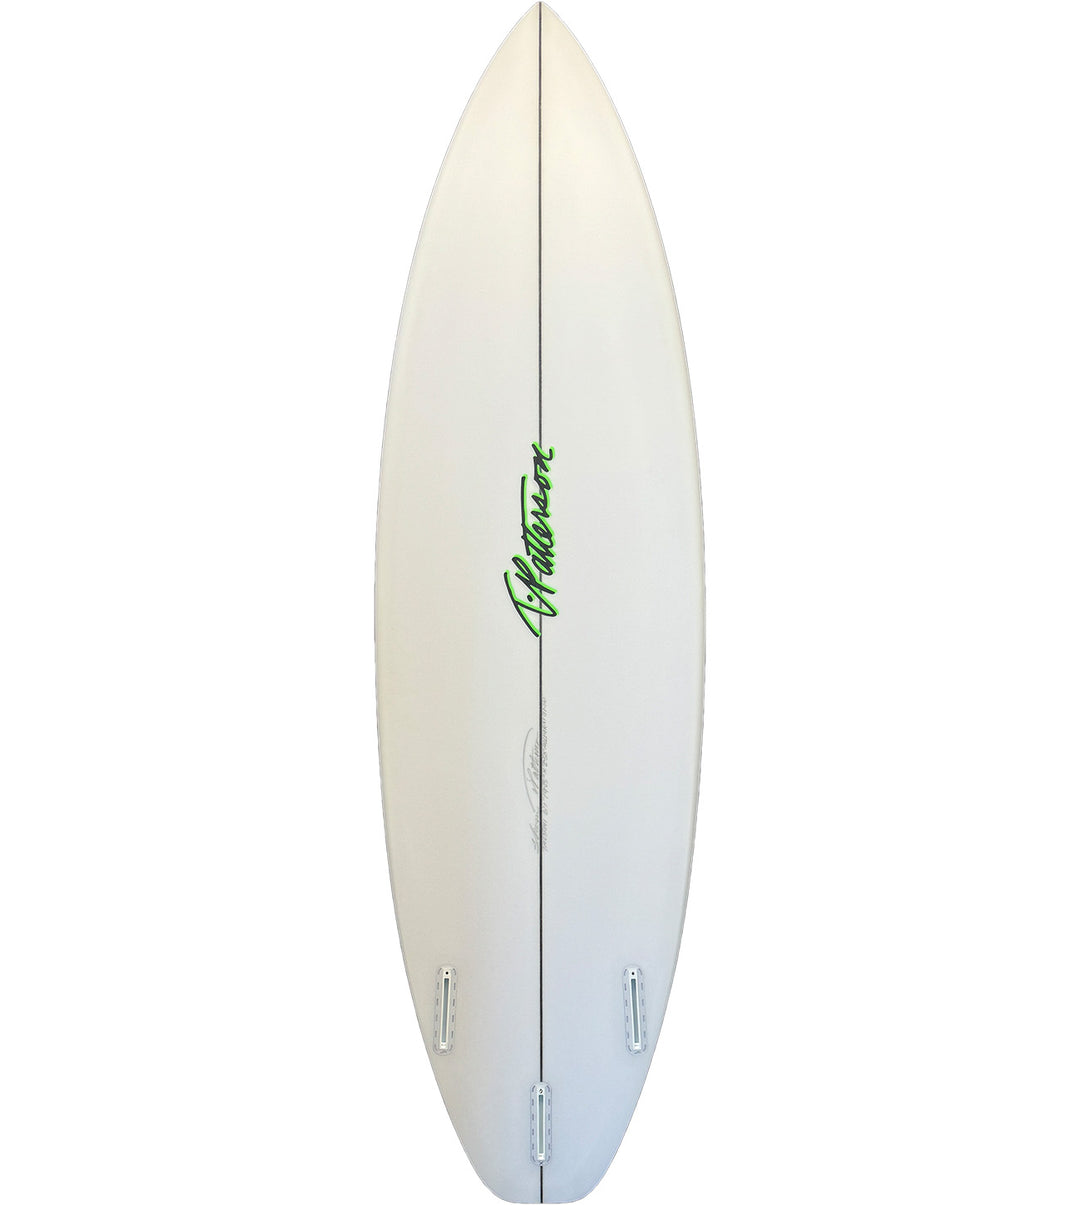 TPatterson Surfboard
Alley Rat/Futures 6'1 #TPS231341